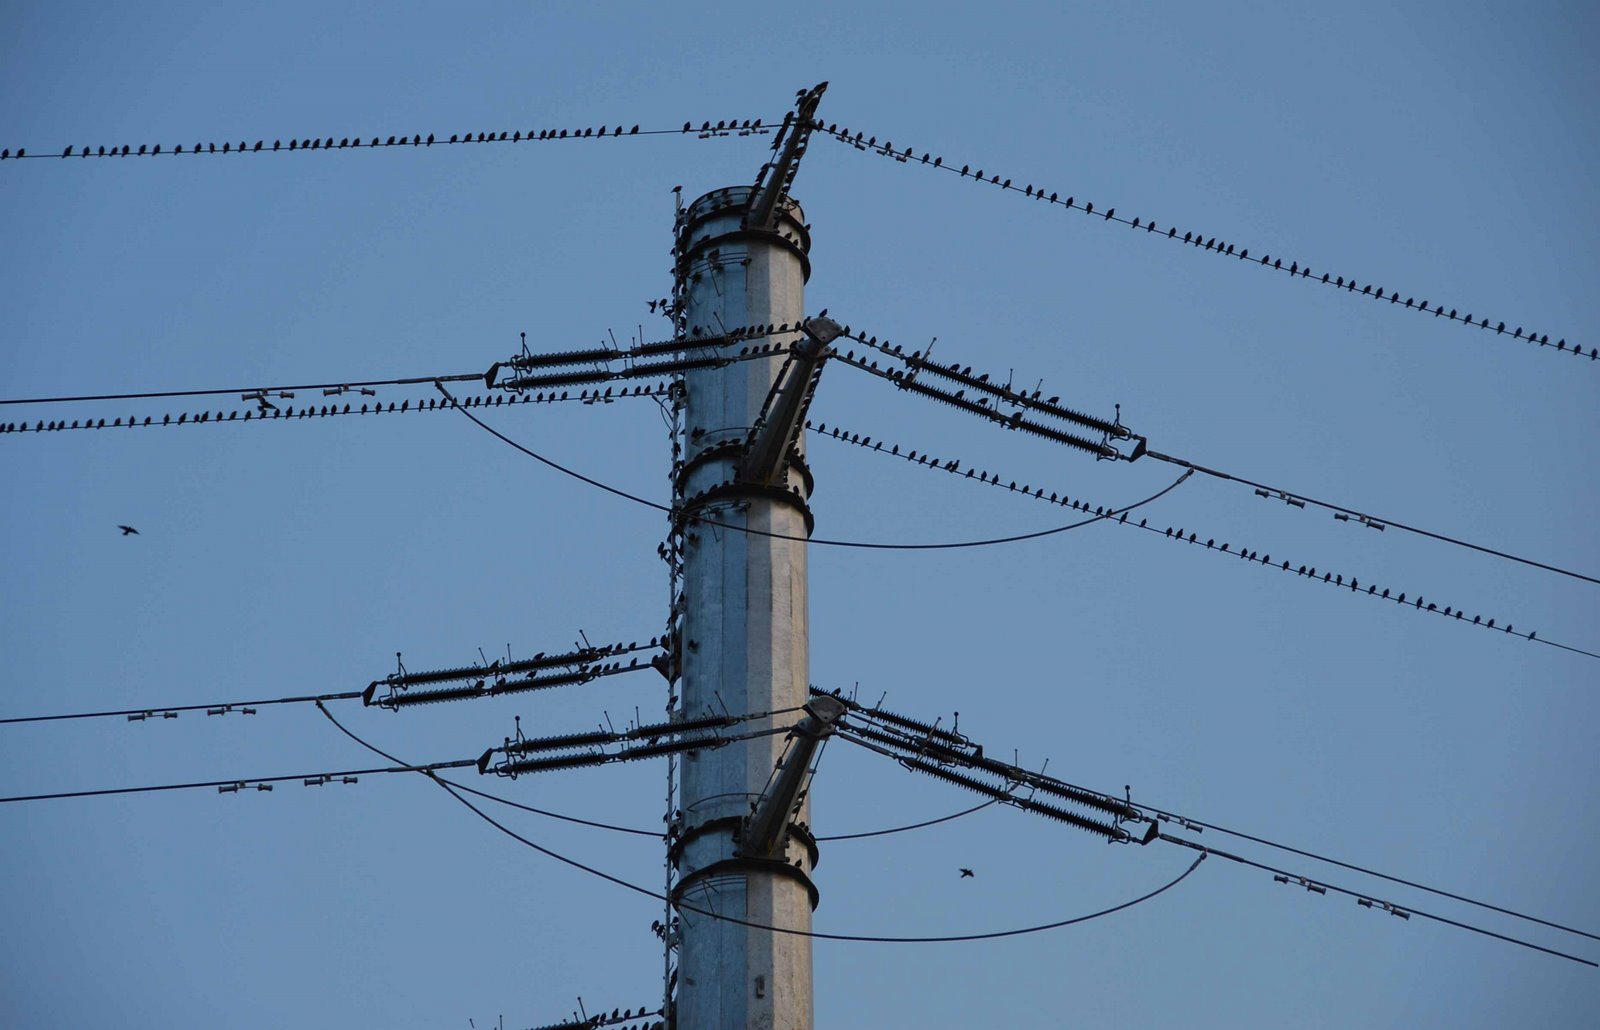 [starlings_on_the_wires.jpg]